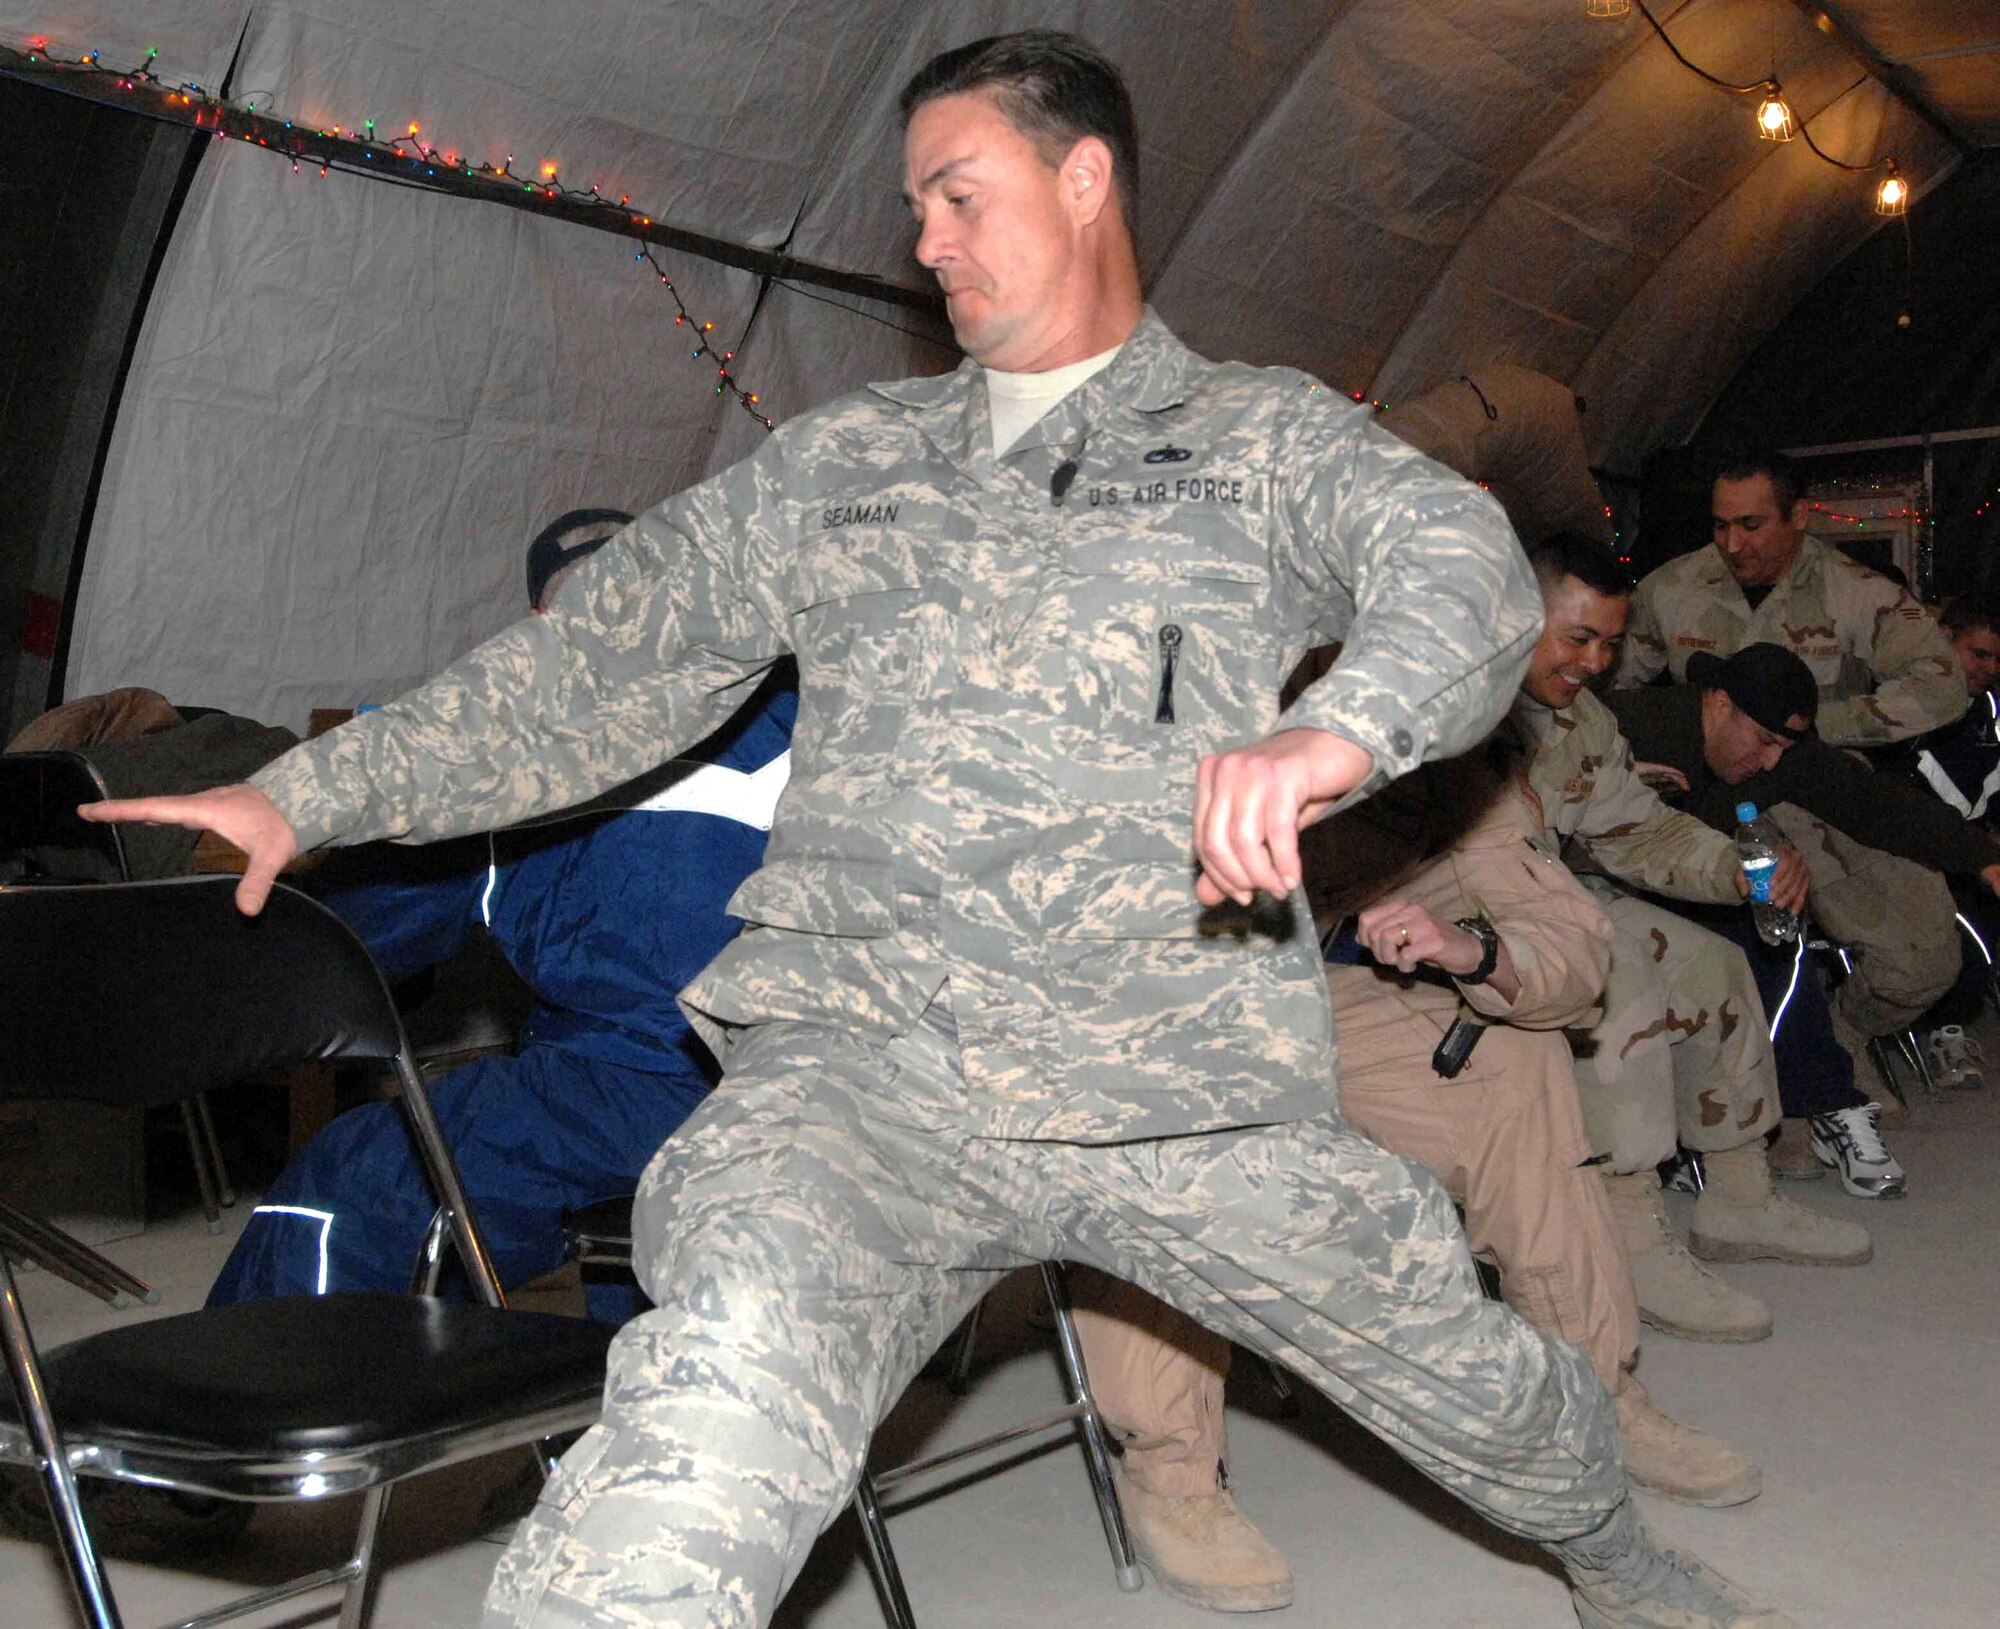 Master Sgt. Mark Seaman races for a seat as part of a "musical chairs" games during a holiday celebration co-sponsored by the 455th Expeditionary Mission Support Squadron, private organizations and volunteers Dec. 23 at Bagram Air Base, Afghanistan. Sergeant Seaman is assigned to the 455th Air Expeditionary Wing Safety Office. (U.S. Air Force photo/Capt. Mike Meridith)